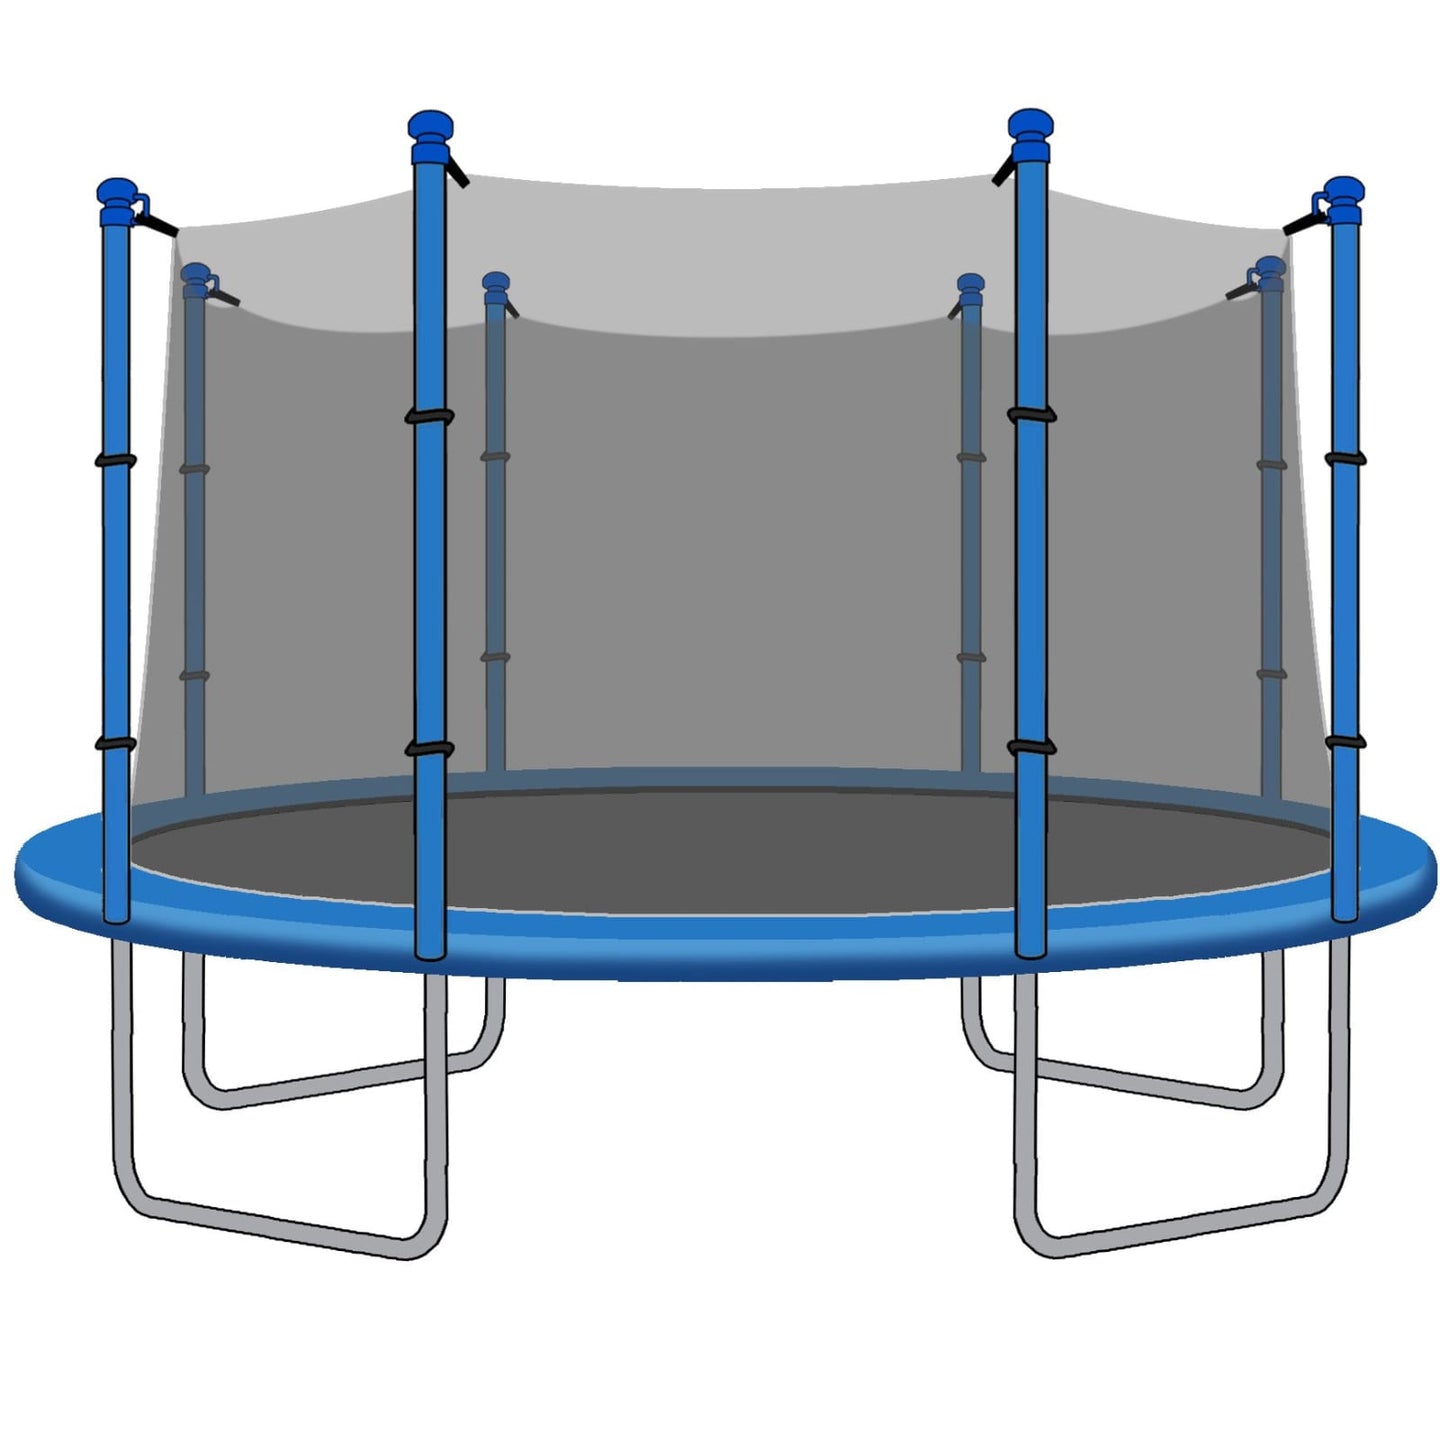 SkyBound 15 Foot Trampoline Net - Fits 15 Foot Frames with 8 Straight Enclosure Poles or 4 Arches - Trampoline Replacements